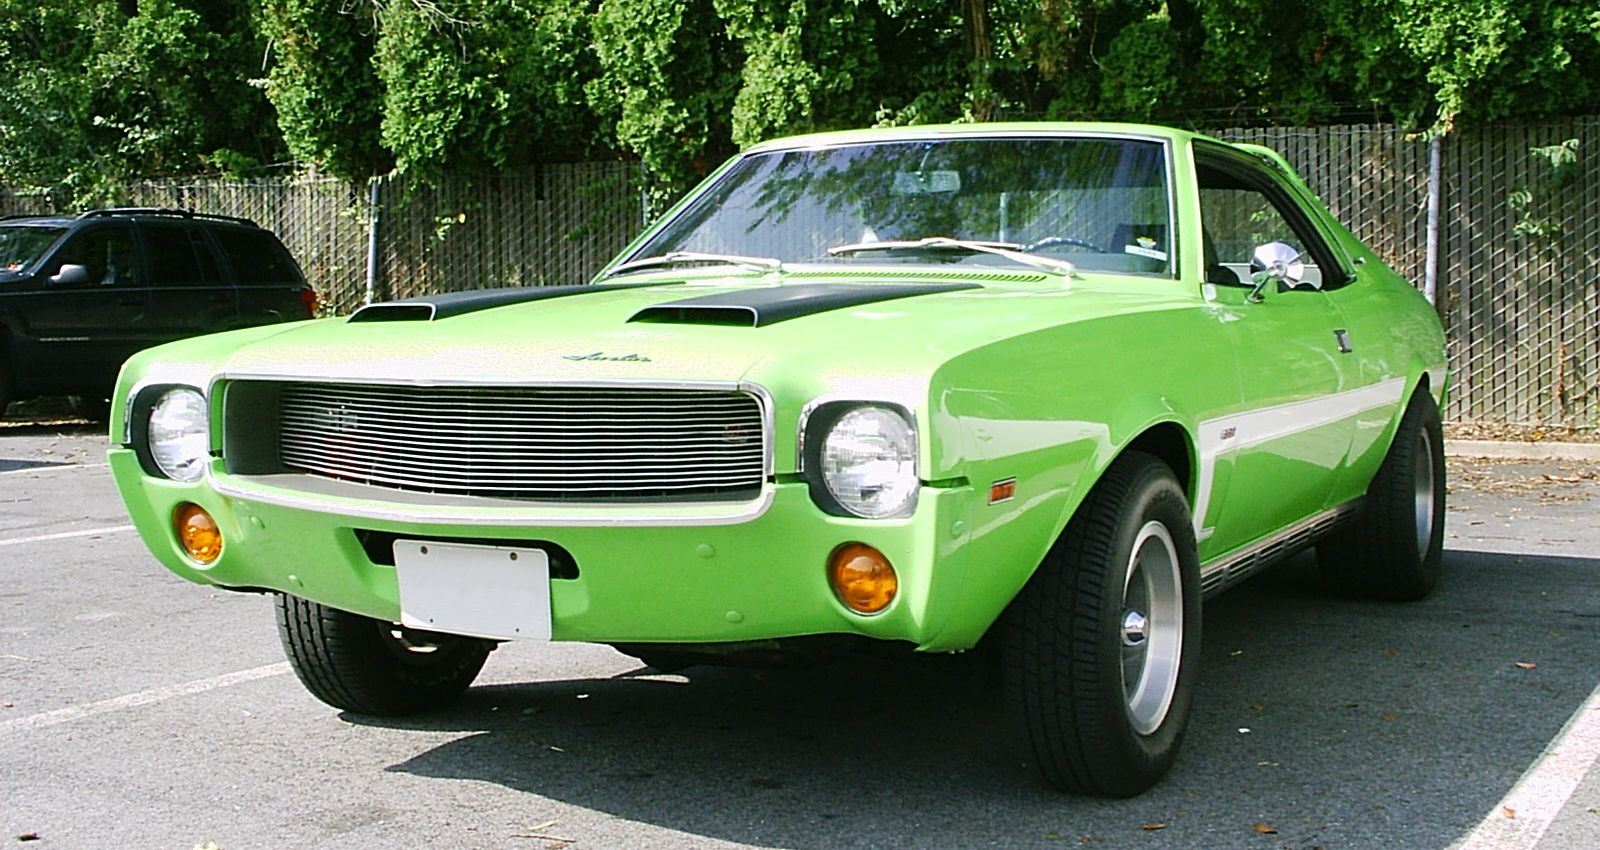 a photo of a green 1969 AMC Javelin from Wikimedia Commons